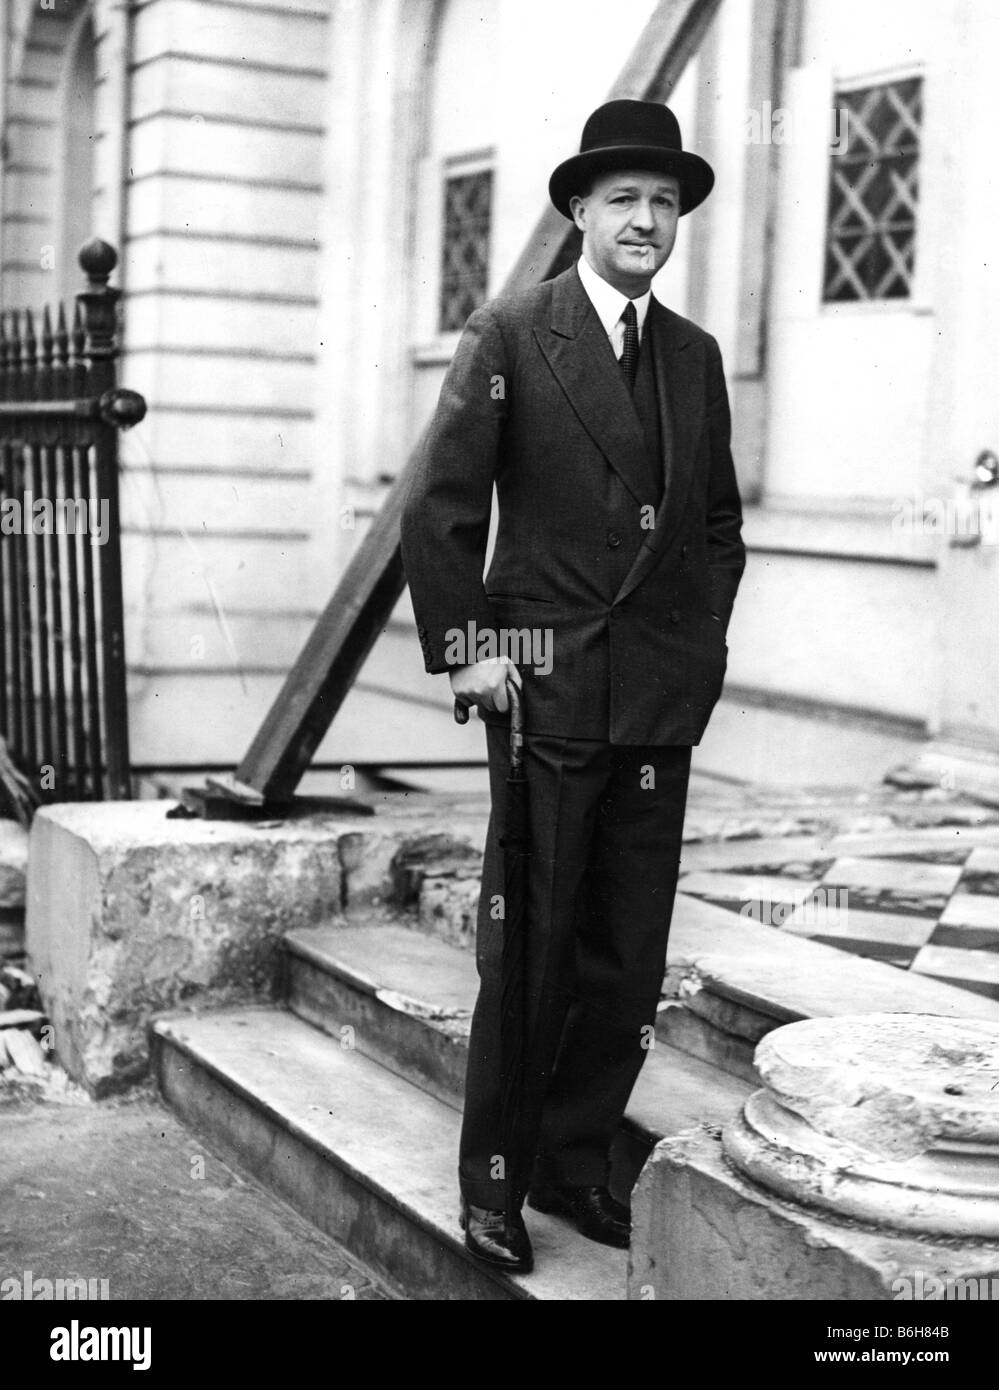 R A BUTLER Conservative politician outside his home at No 5 Belgrave Square,London, in 1940 Stock Photo